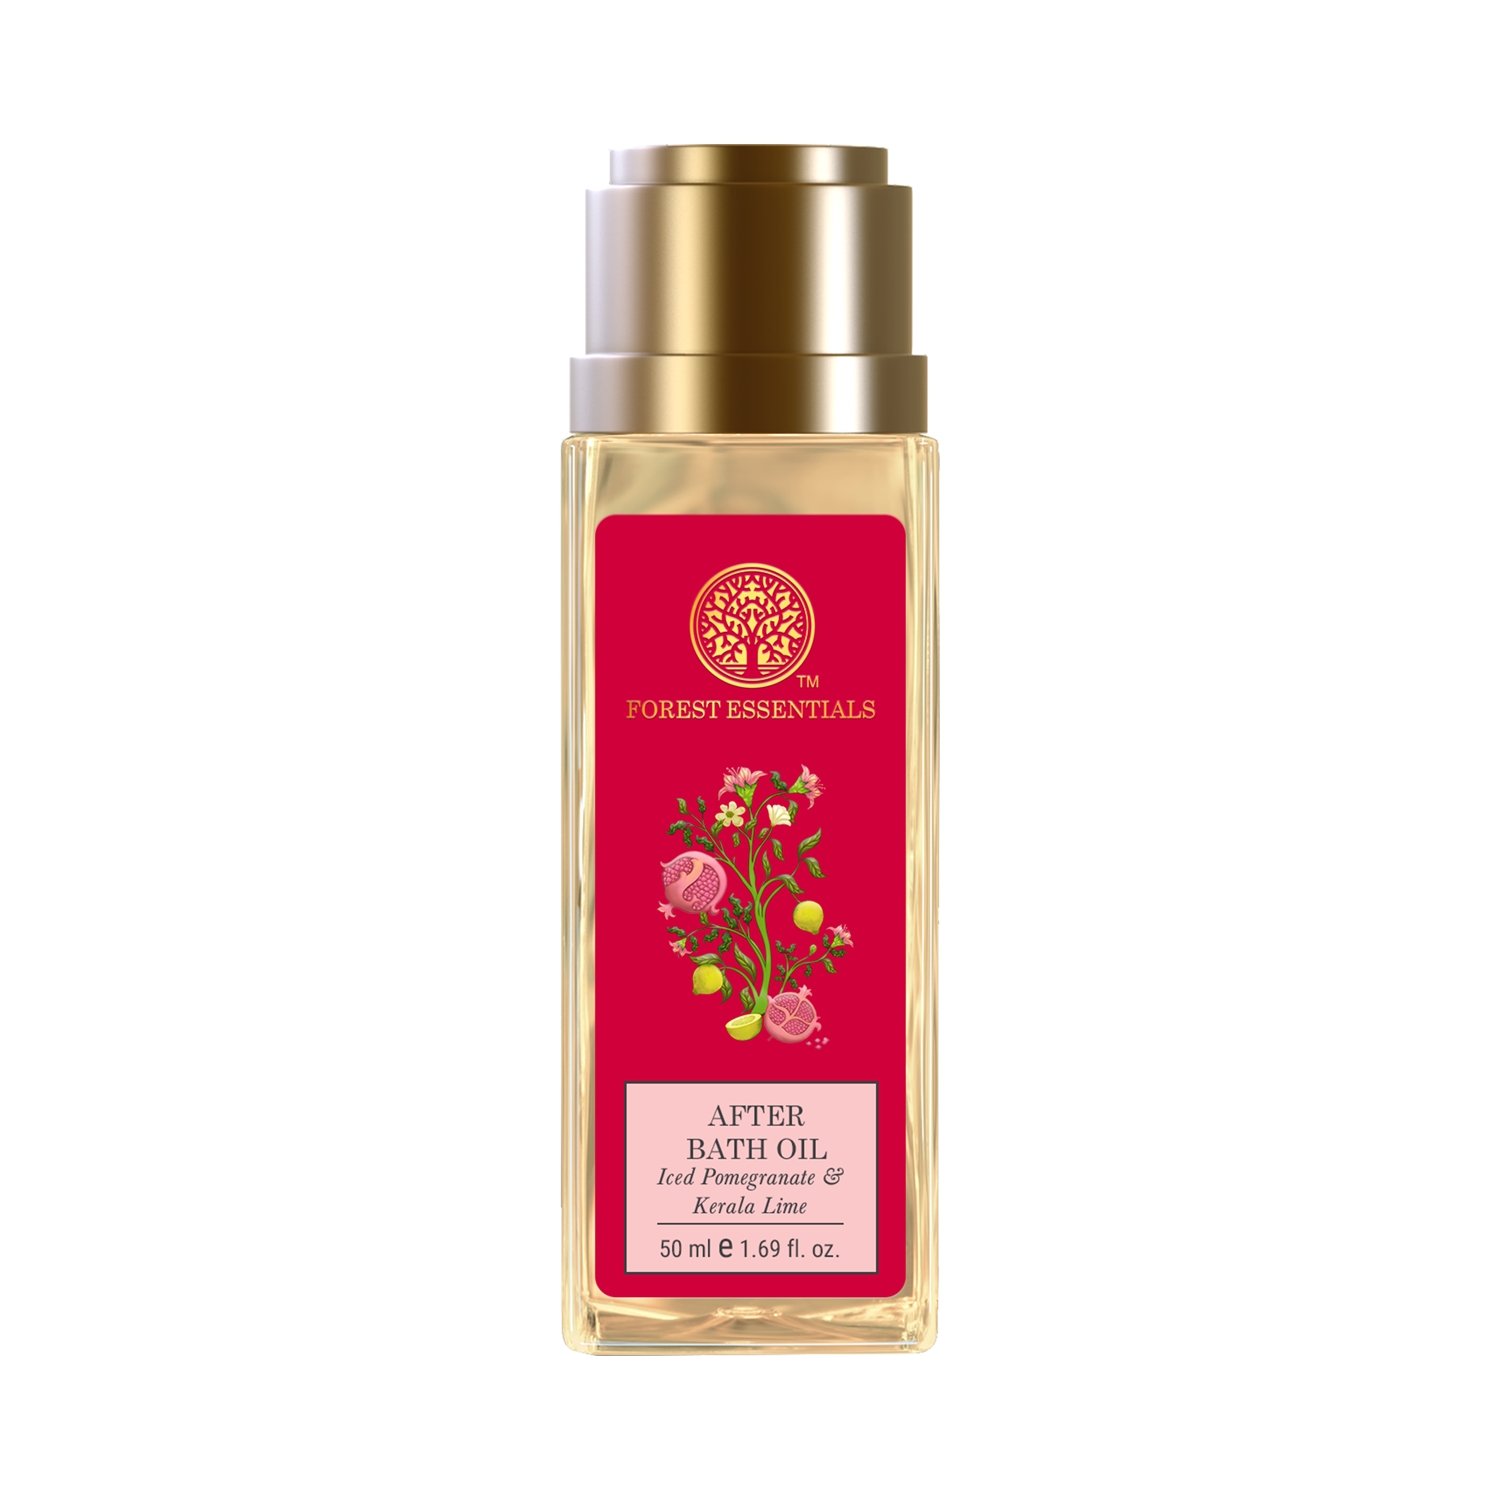 Forest Essentials | Forest Essentials Travel Size Iced Pomegranate & Kerala Lime After Bath Oil (50ml)